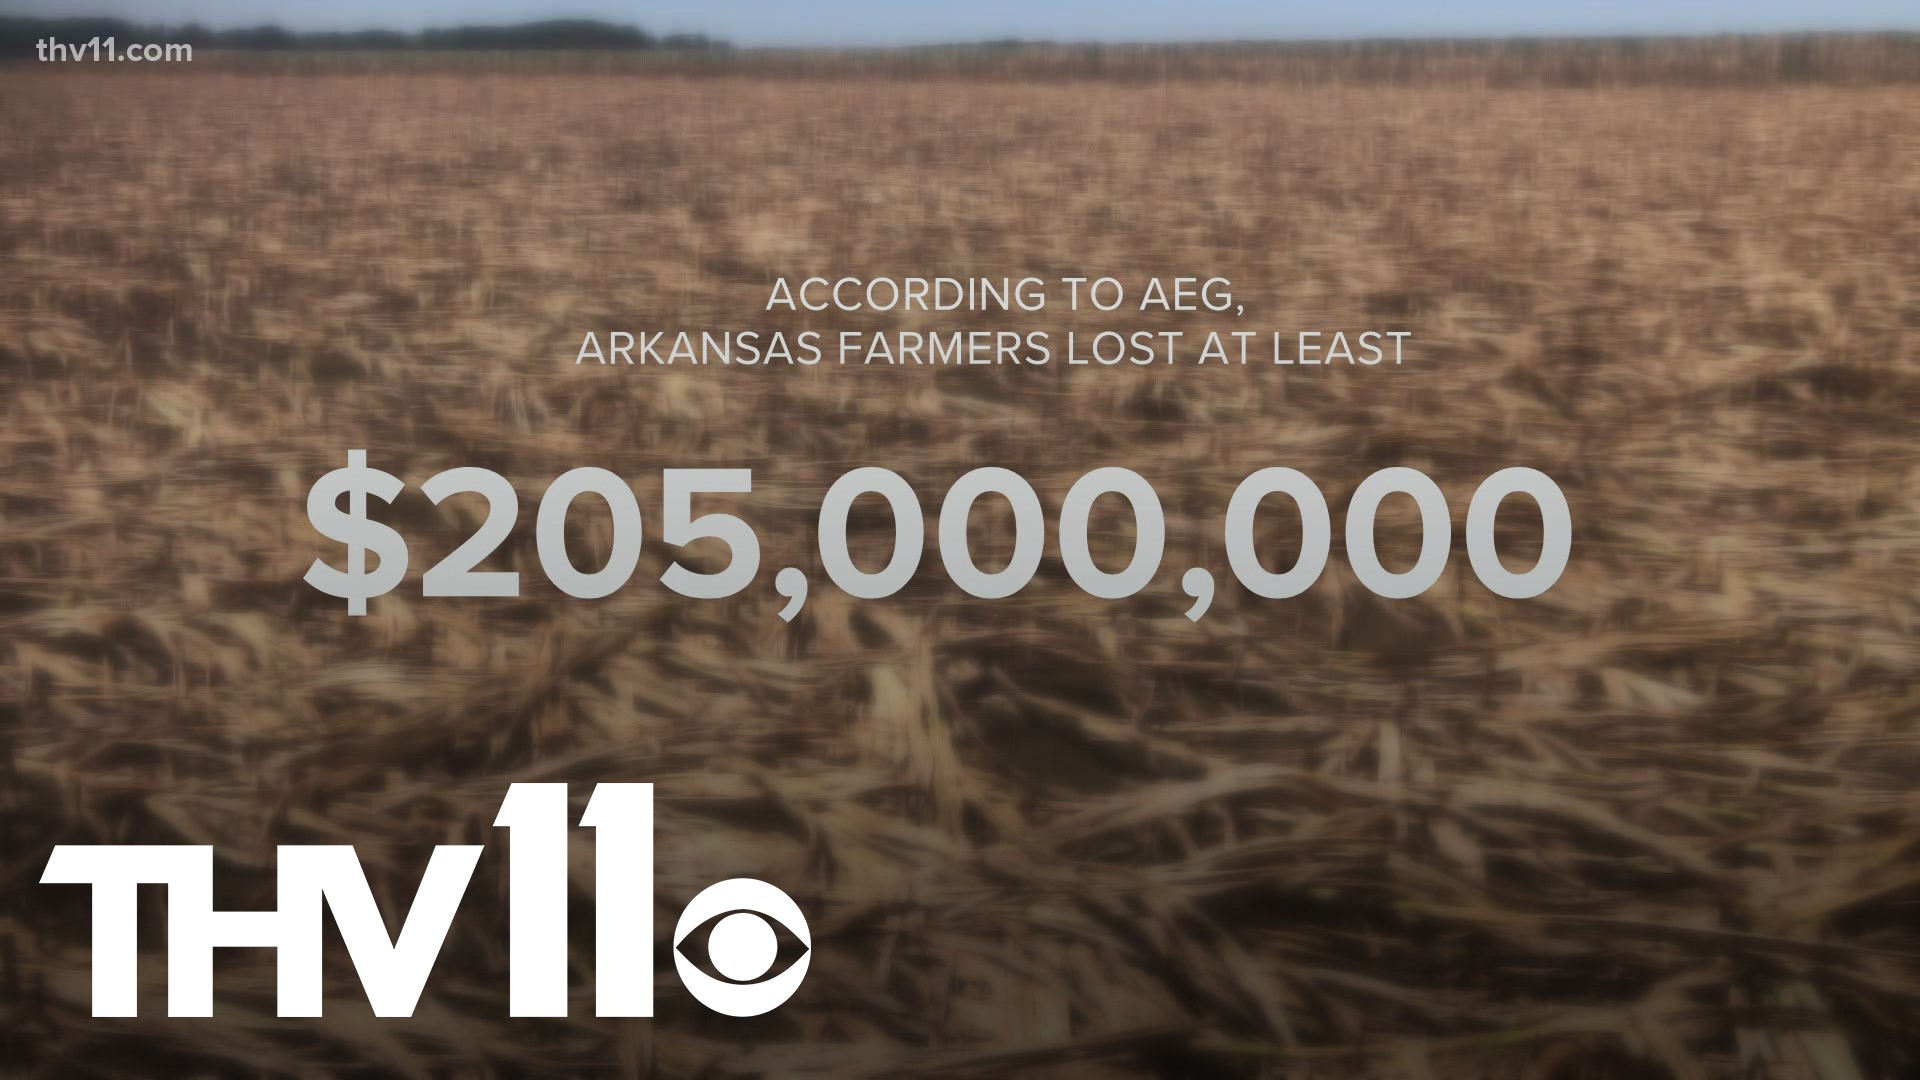 Flooding from heavy rainfall in early June has caused Arkansas farmers hundreds of millions of dollars in damage.